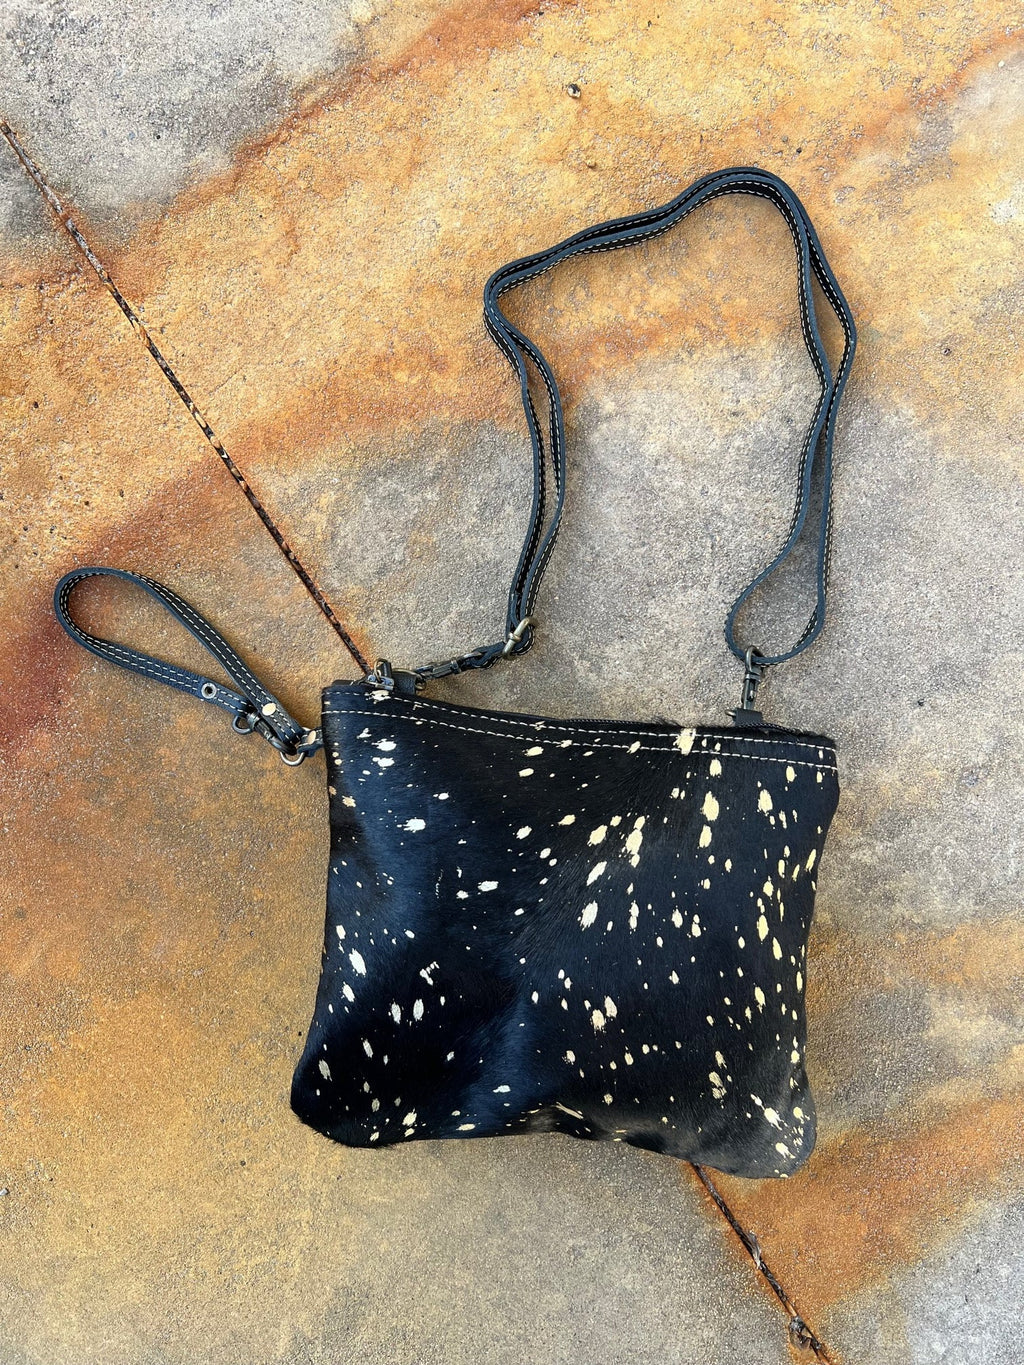 This sleek and stylish Found Gold at Midnight Bag is perfect for making a statement. The luxurious black leather back and soft black hair on hide beautifully contrast the eye-catching gold splatter paint. Its 6" wristlet and 30" shoulder straps make it easy to rock your style any way you please. Live your glamorous life in luxury!